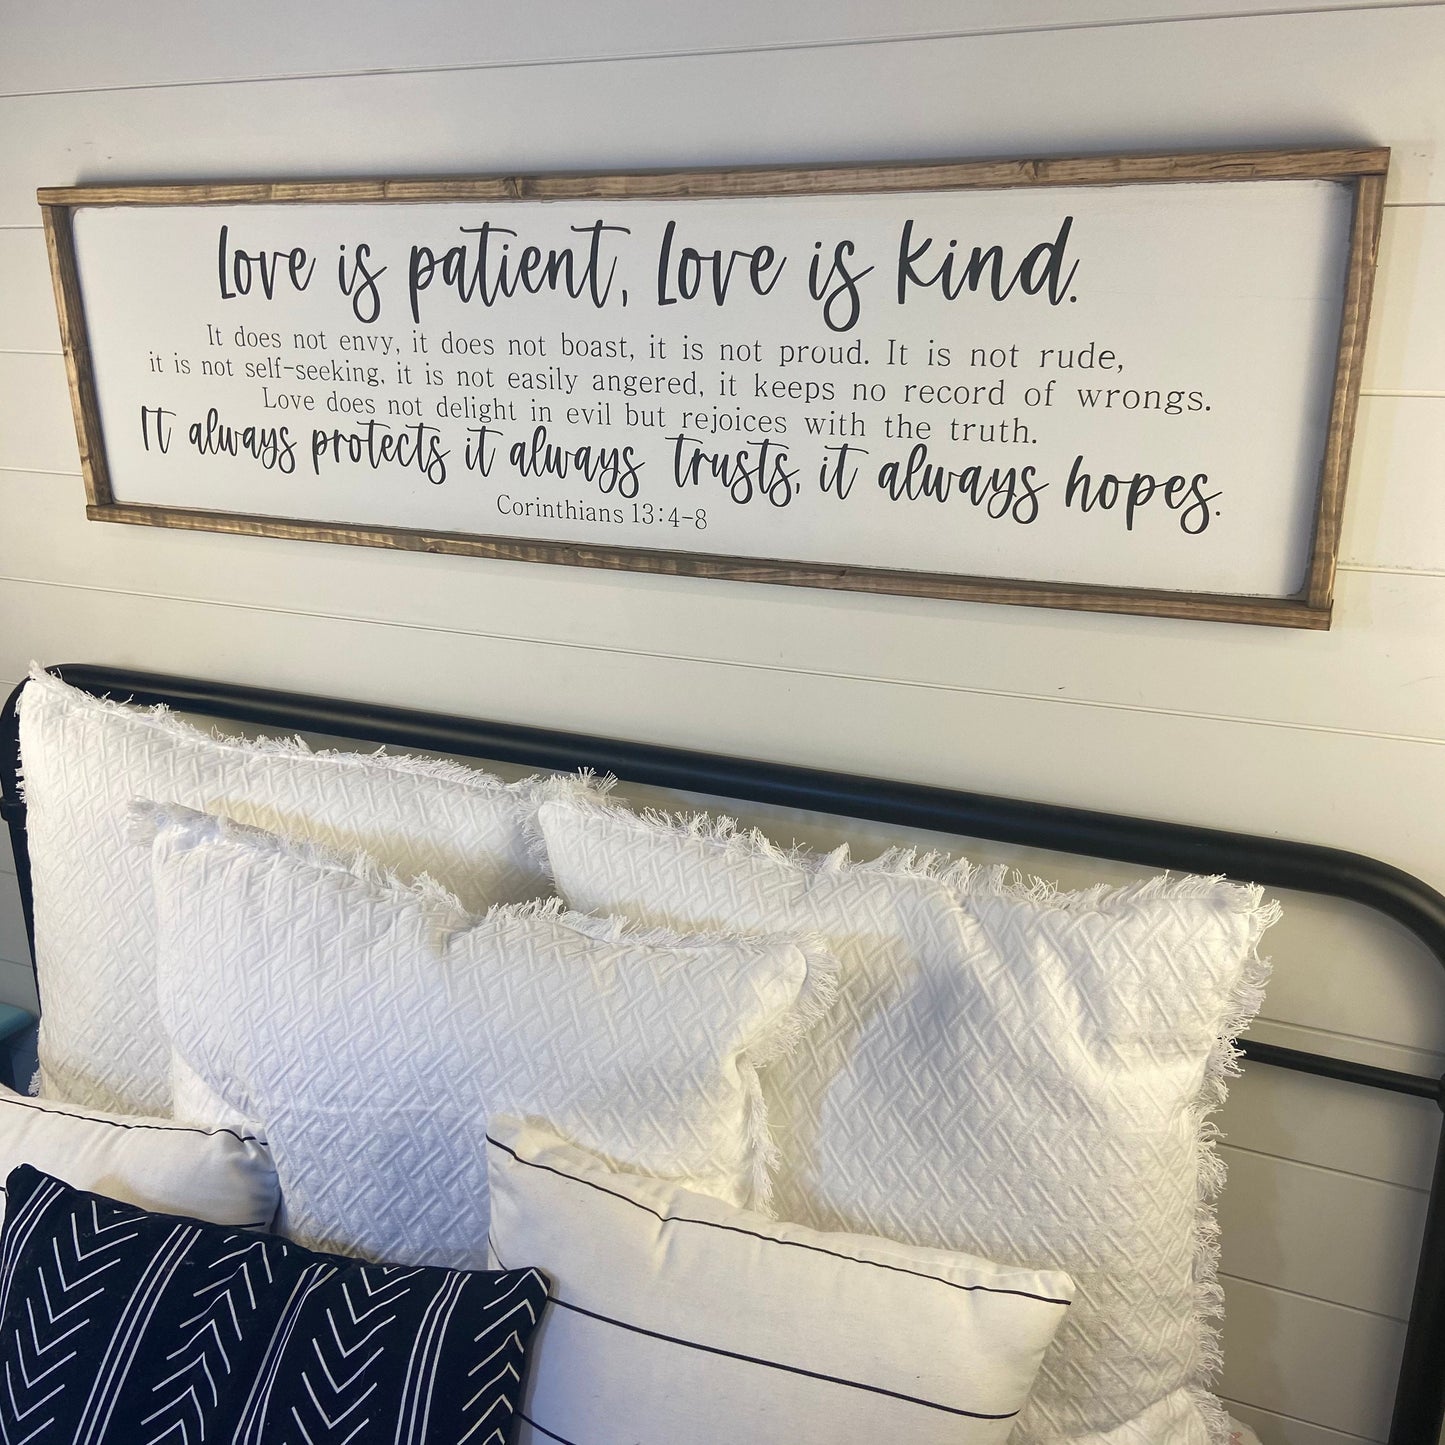 love is patient, love is kind - above the bed sign [FREE SHIPPING!]